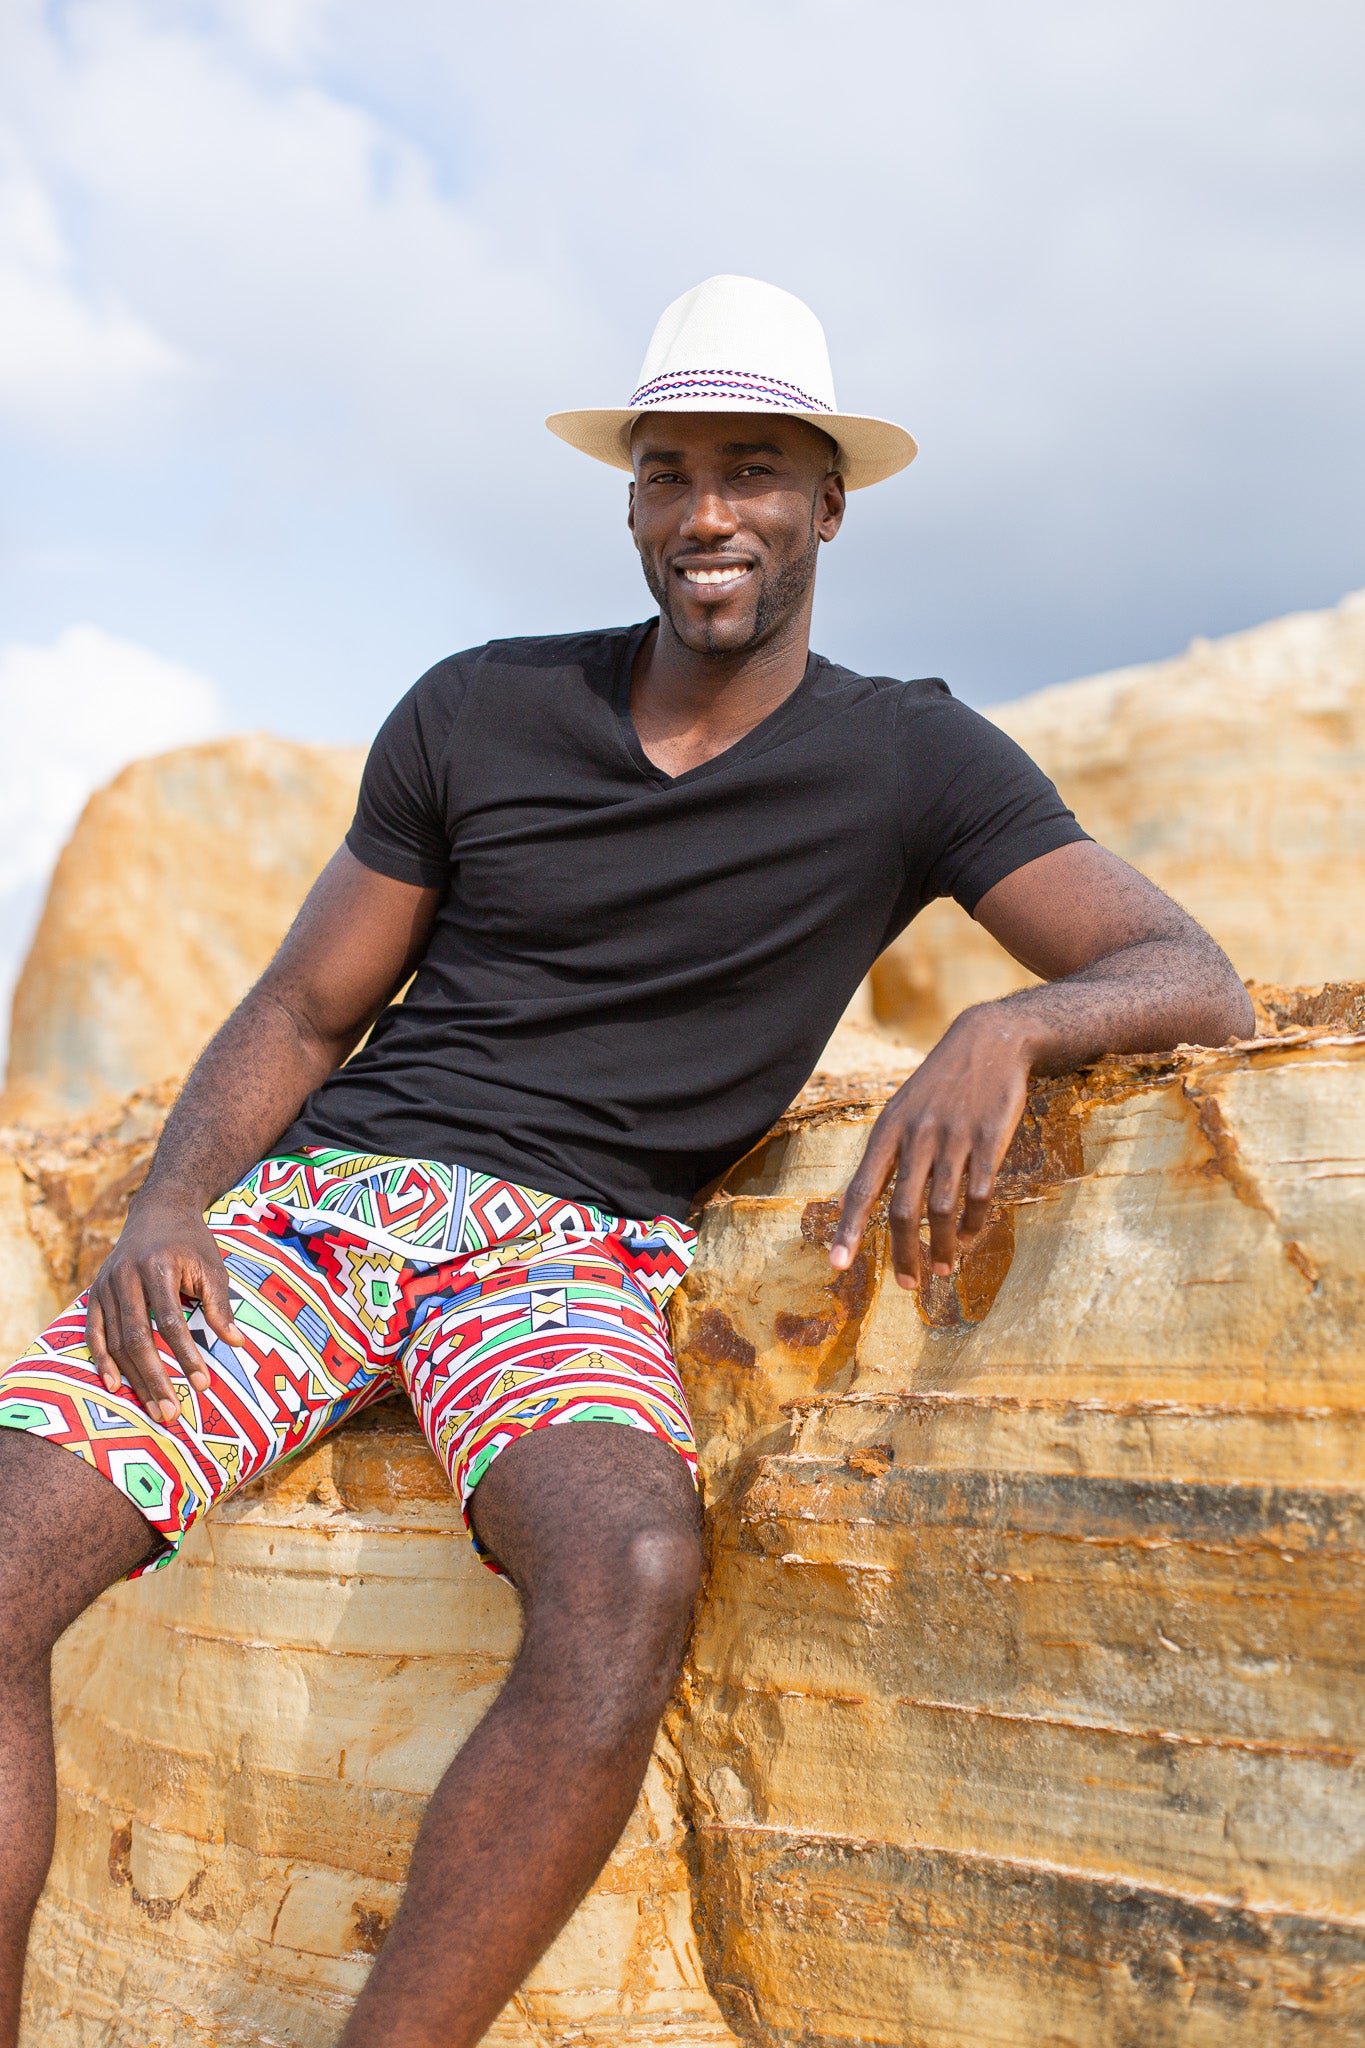 Madi African Shorts by Tribe Afrique Tribe Afrique